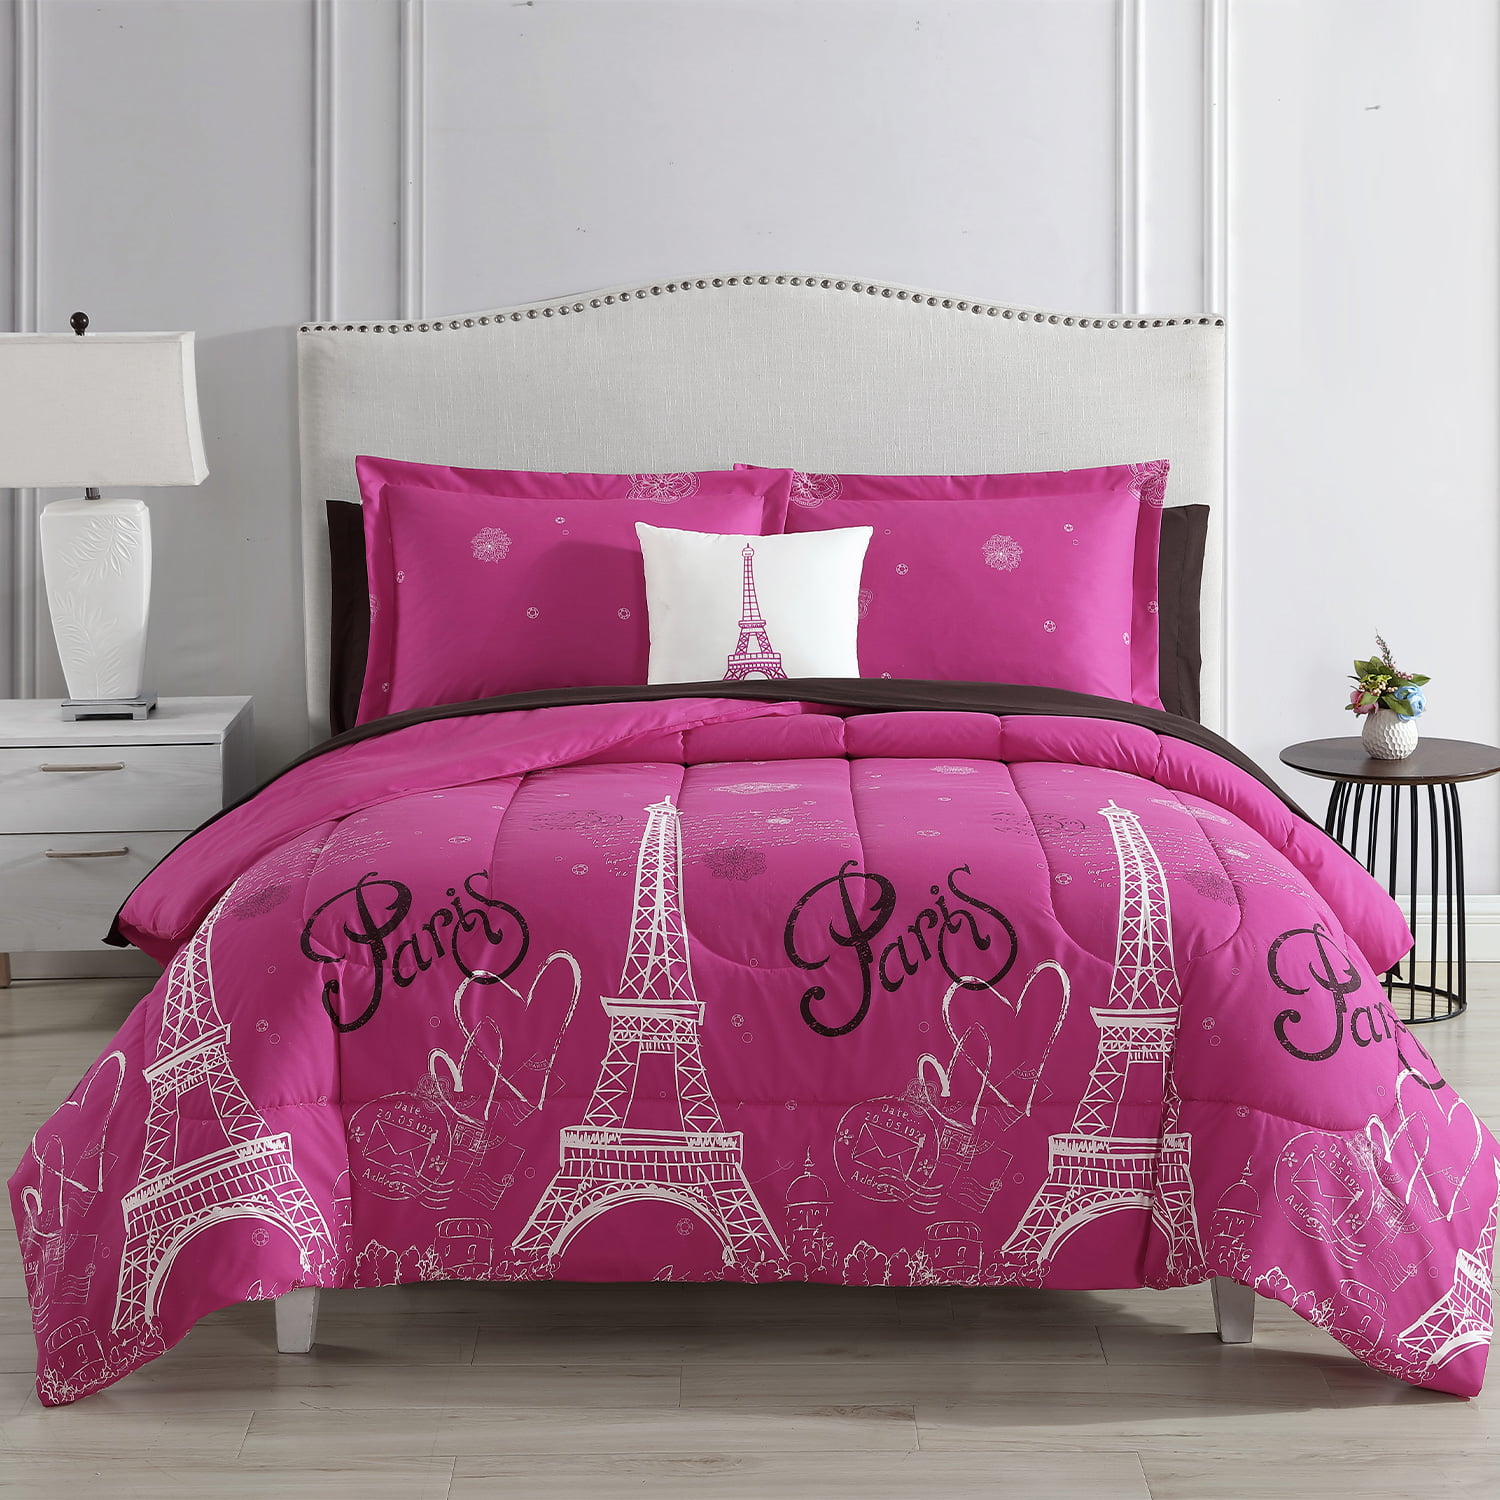 Queen Paris Comforter Pink Black White, Queen Size Bed Set Black And White